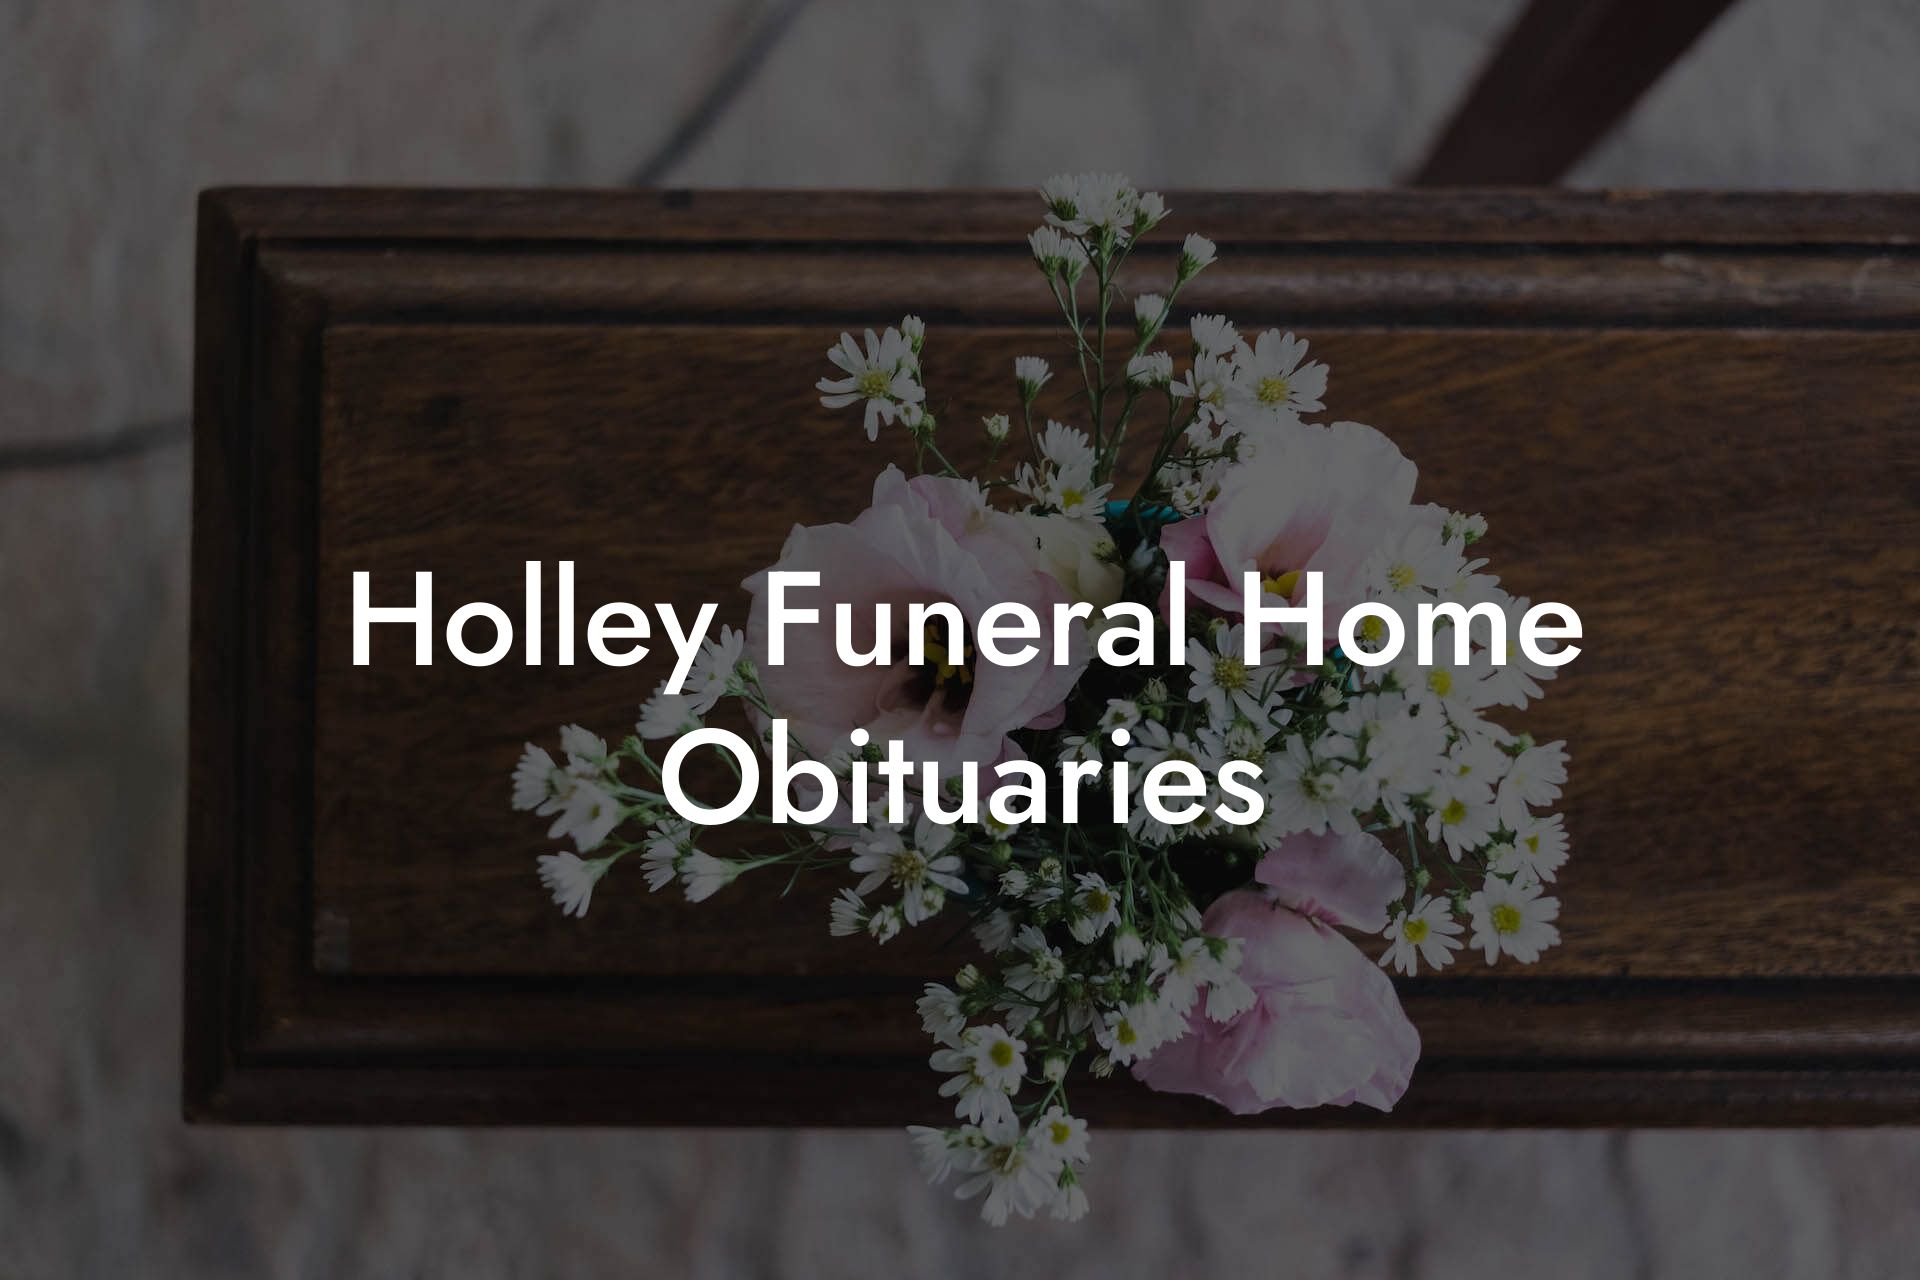 Holley Funeral Home Obituaries